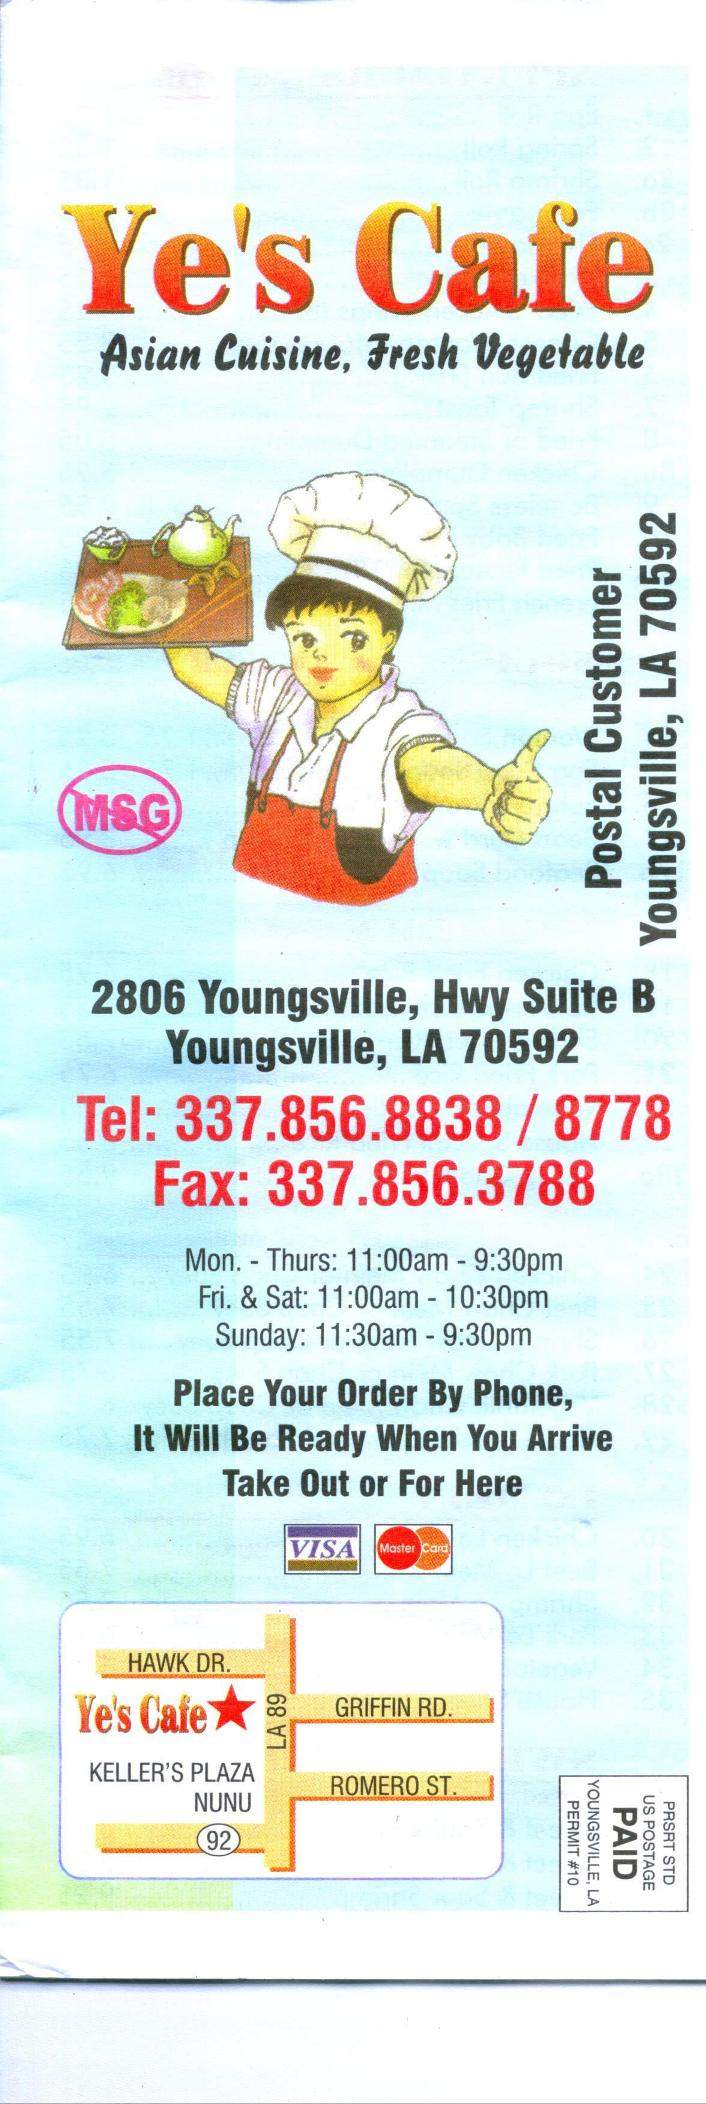 /1802822/Yes-Cafe-Youngsville-LA - Youngsville, LA